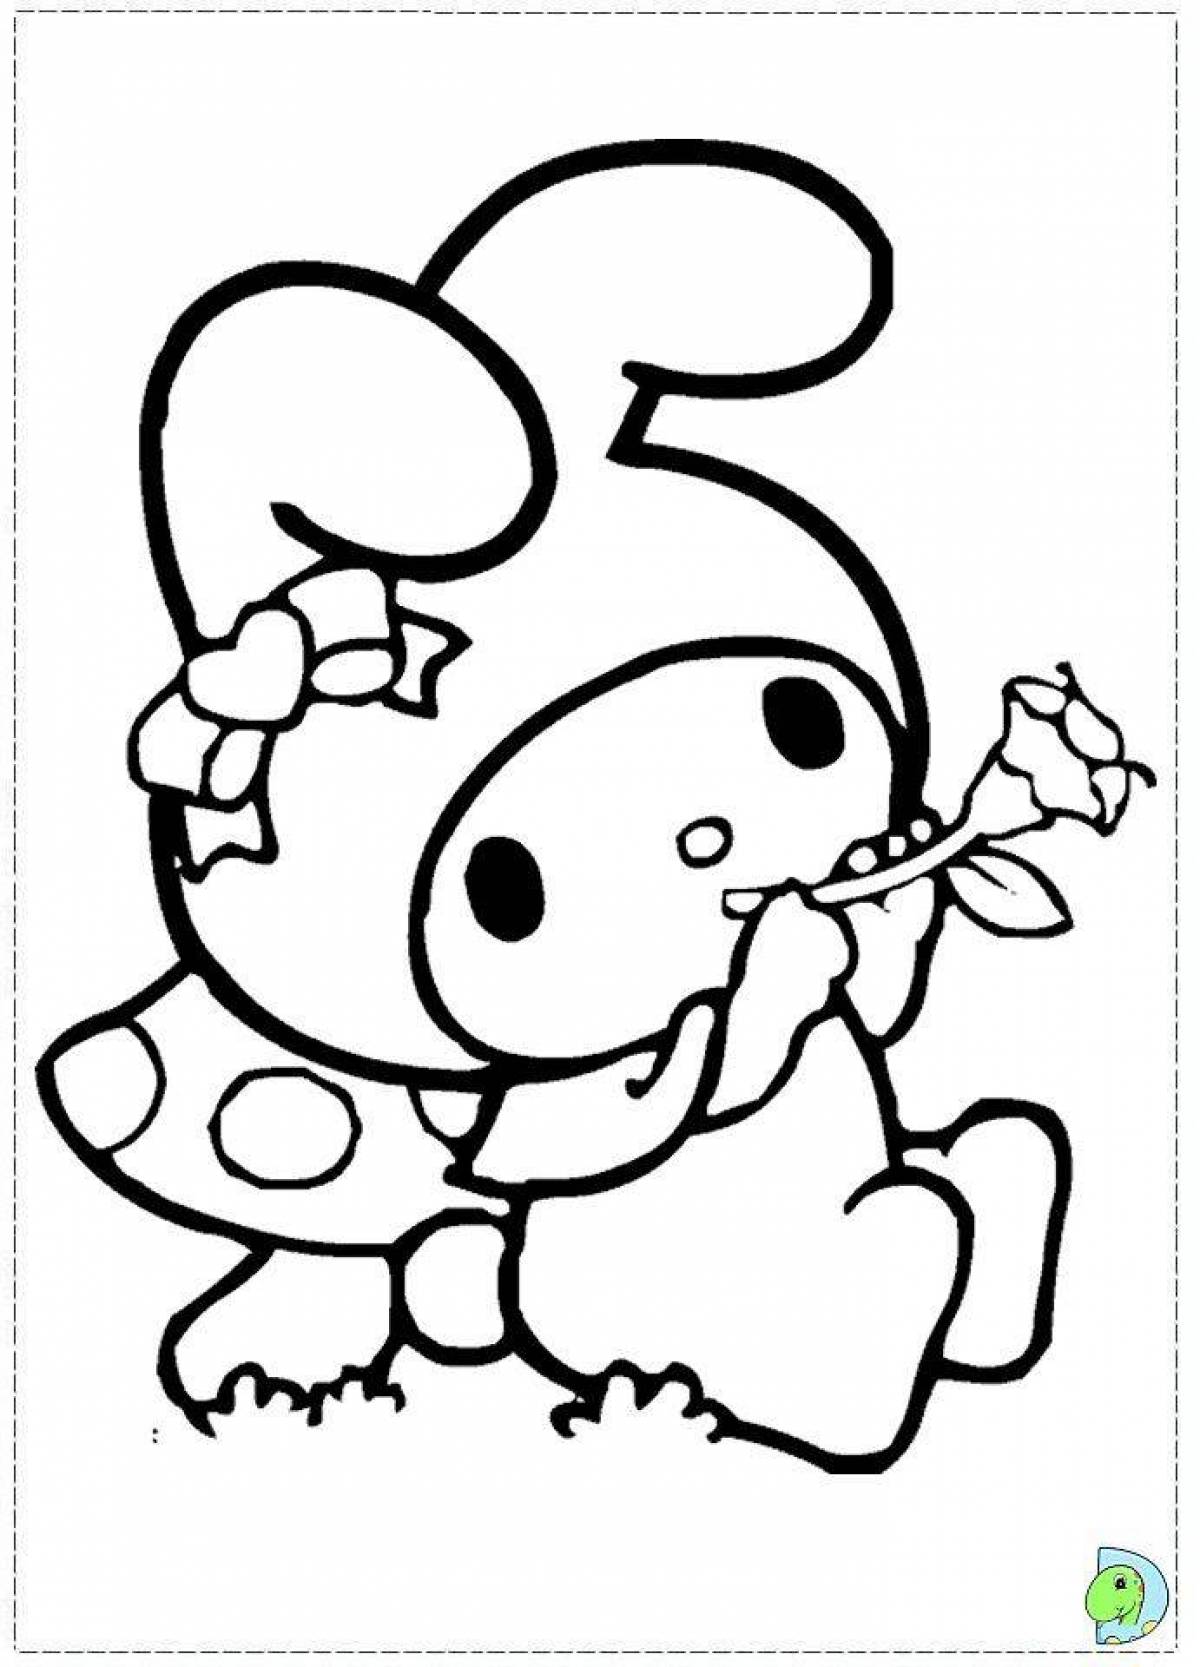 Cute kuromi and hello kitty coloring book